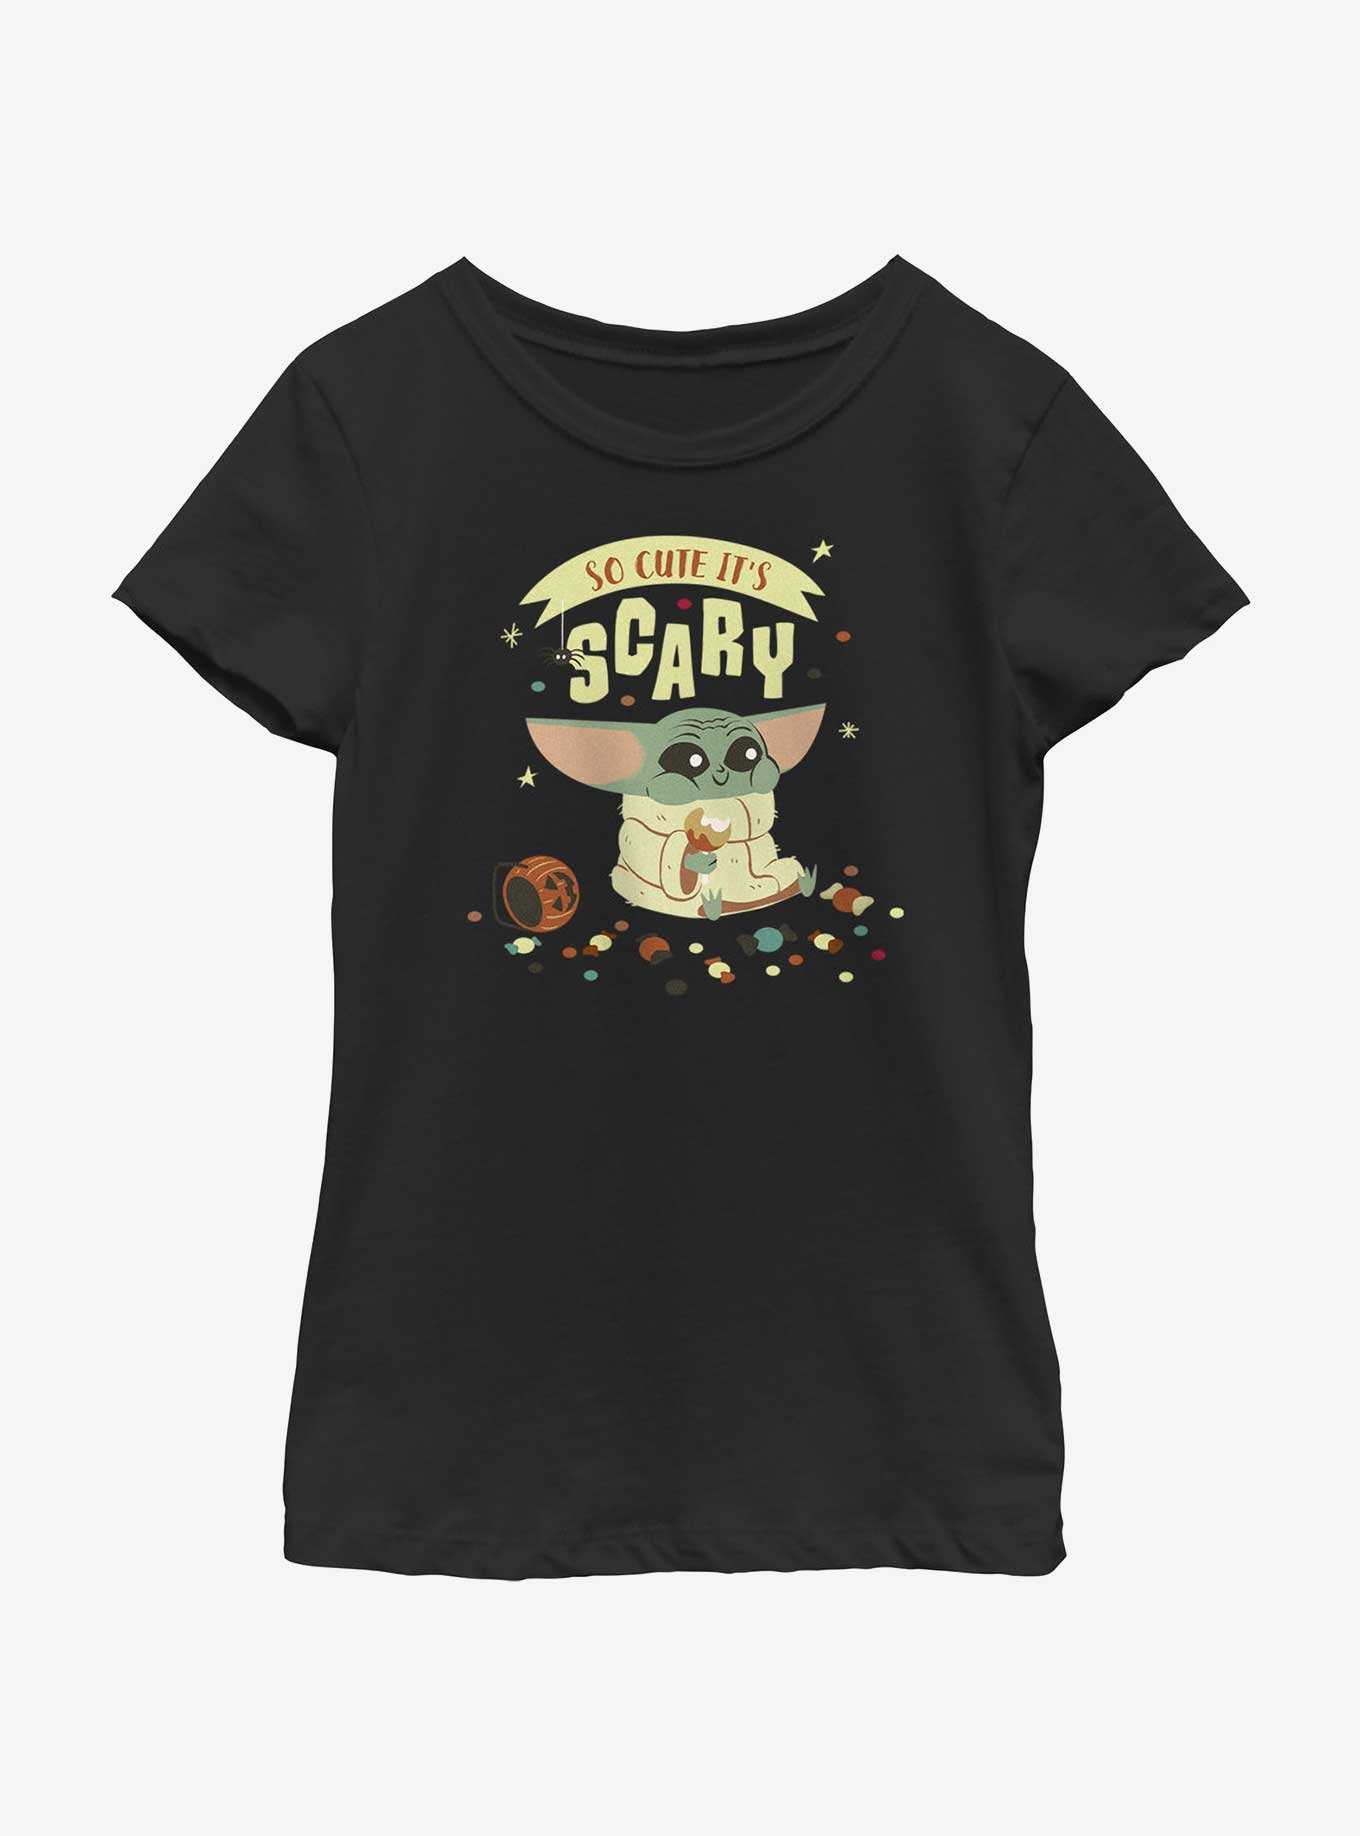 Star Wars The Mandalorian The Child It's Scary Youth Girls T-Shirt, , hi-res